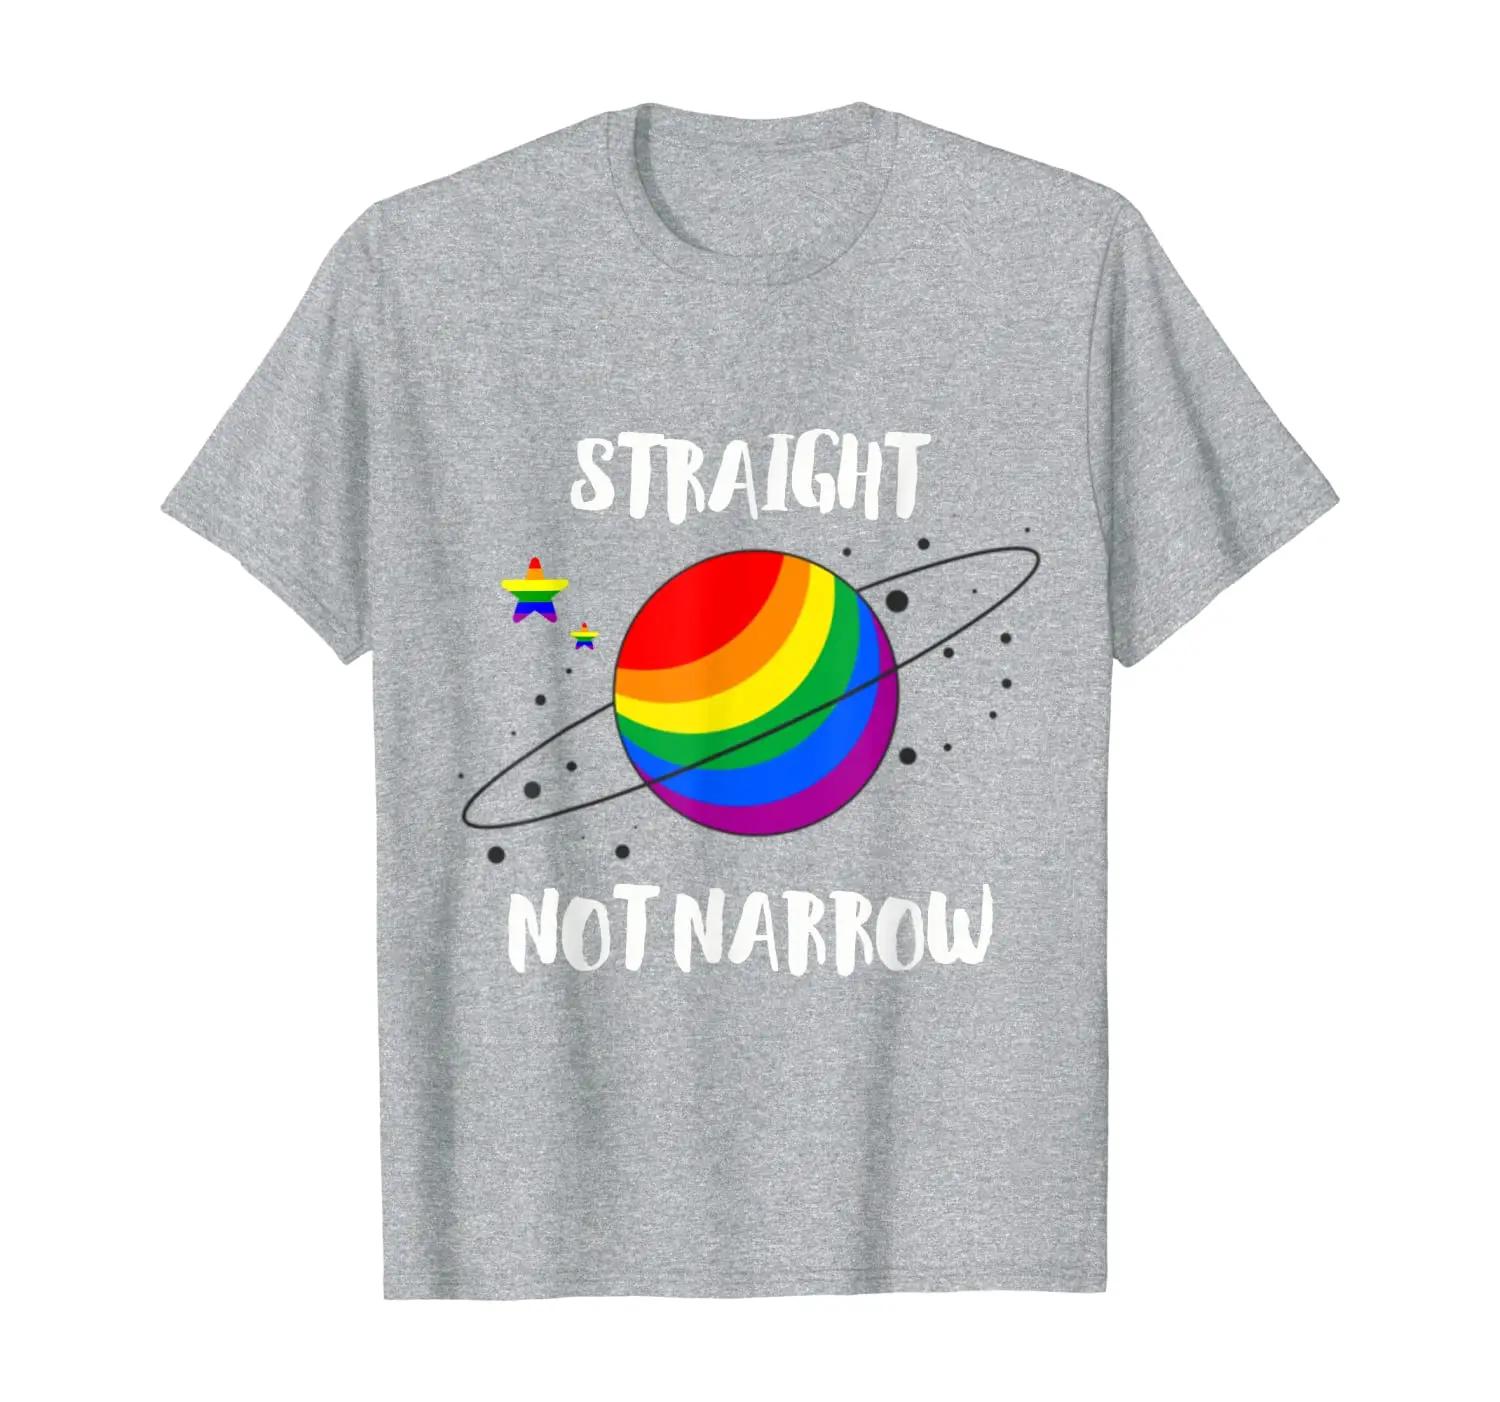 LGBT Pride straight but not narrow shirt Pride Ally